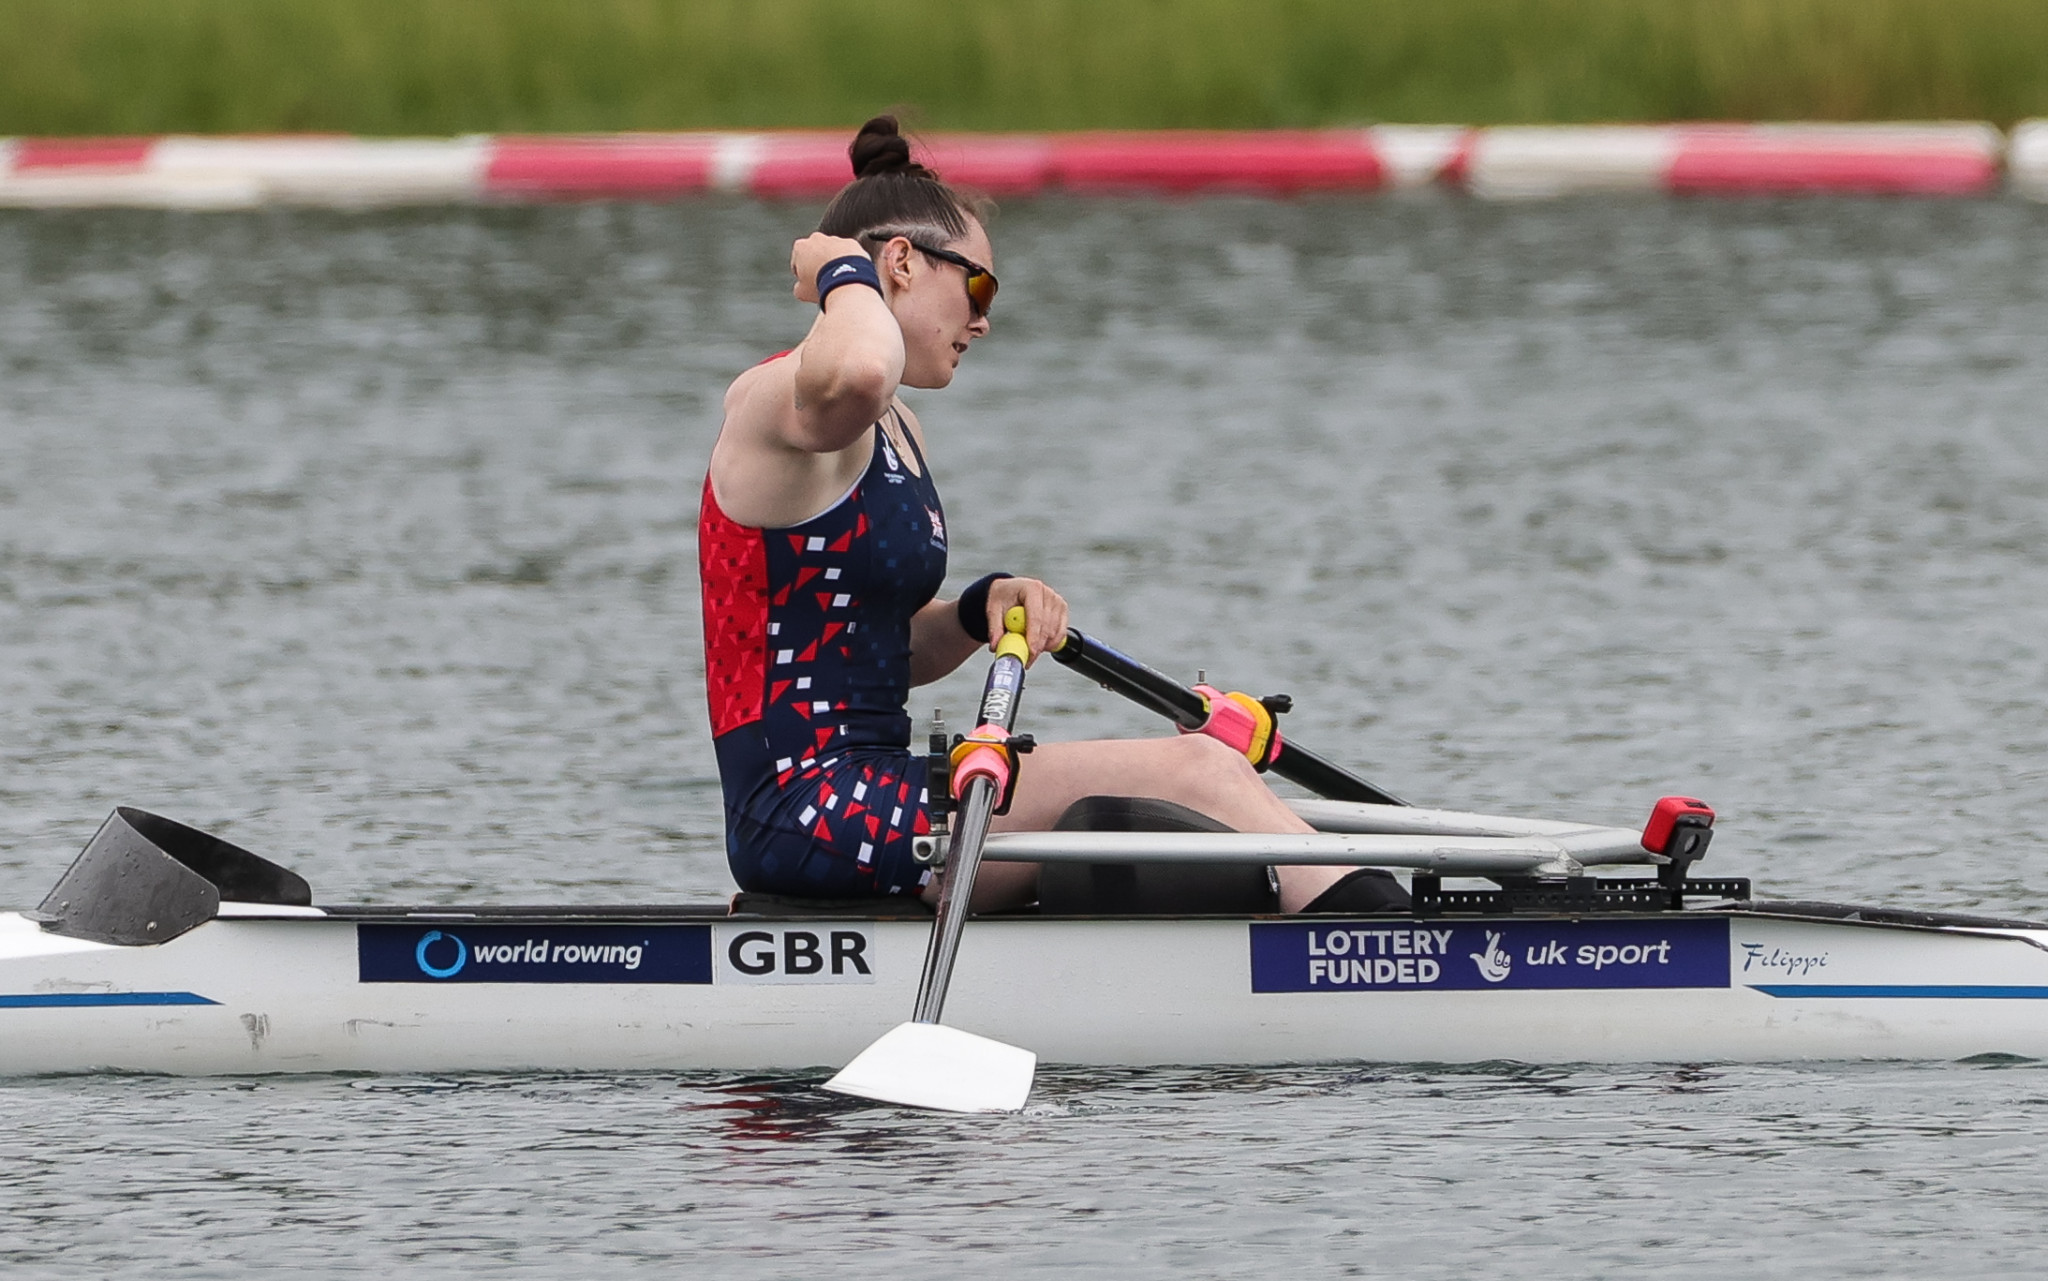 Britain’s Rowles defeats world champion Ross to claim gold at World Rowing Cup